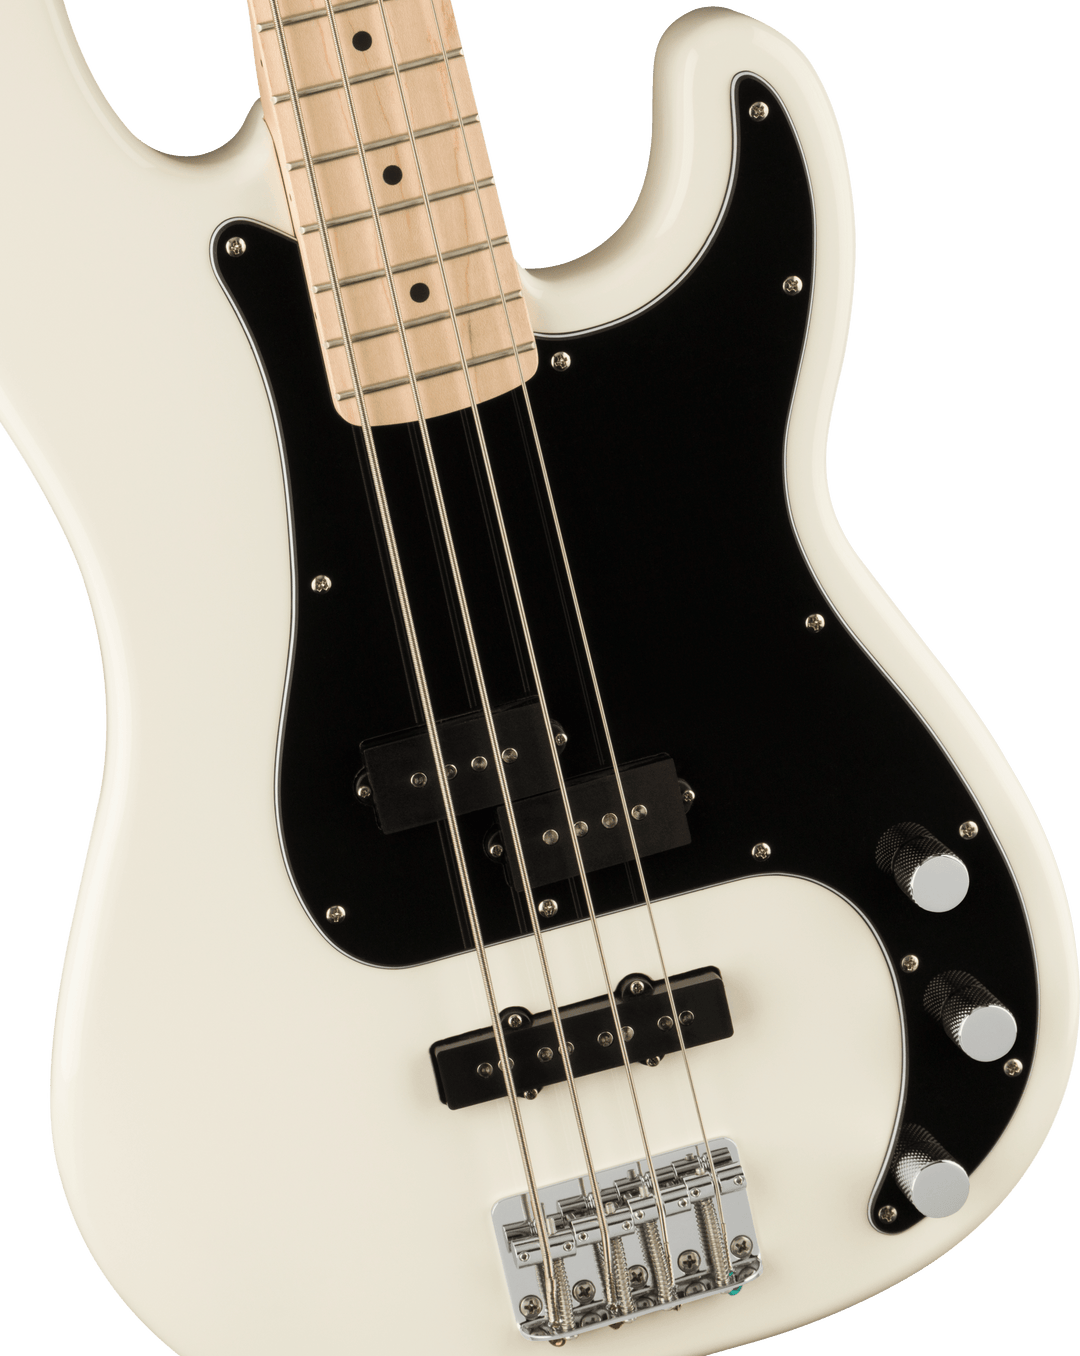 Squier Affinity Series Precision PJ Bass, Maple Fingerboard, Olympic White